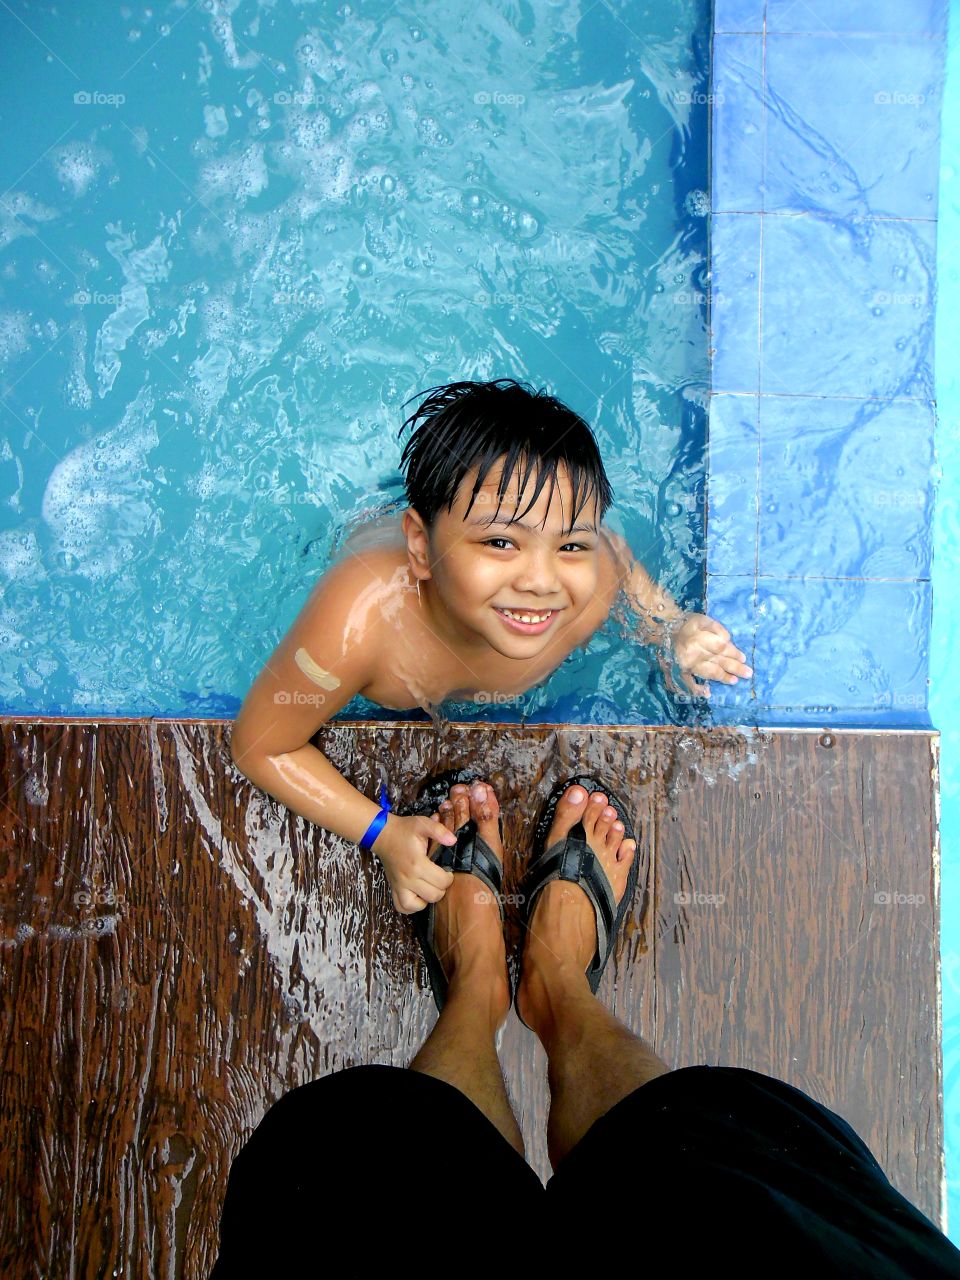 young boy in a swimming pool and an adult's feet